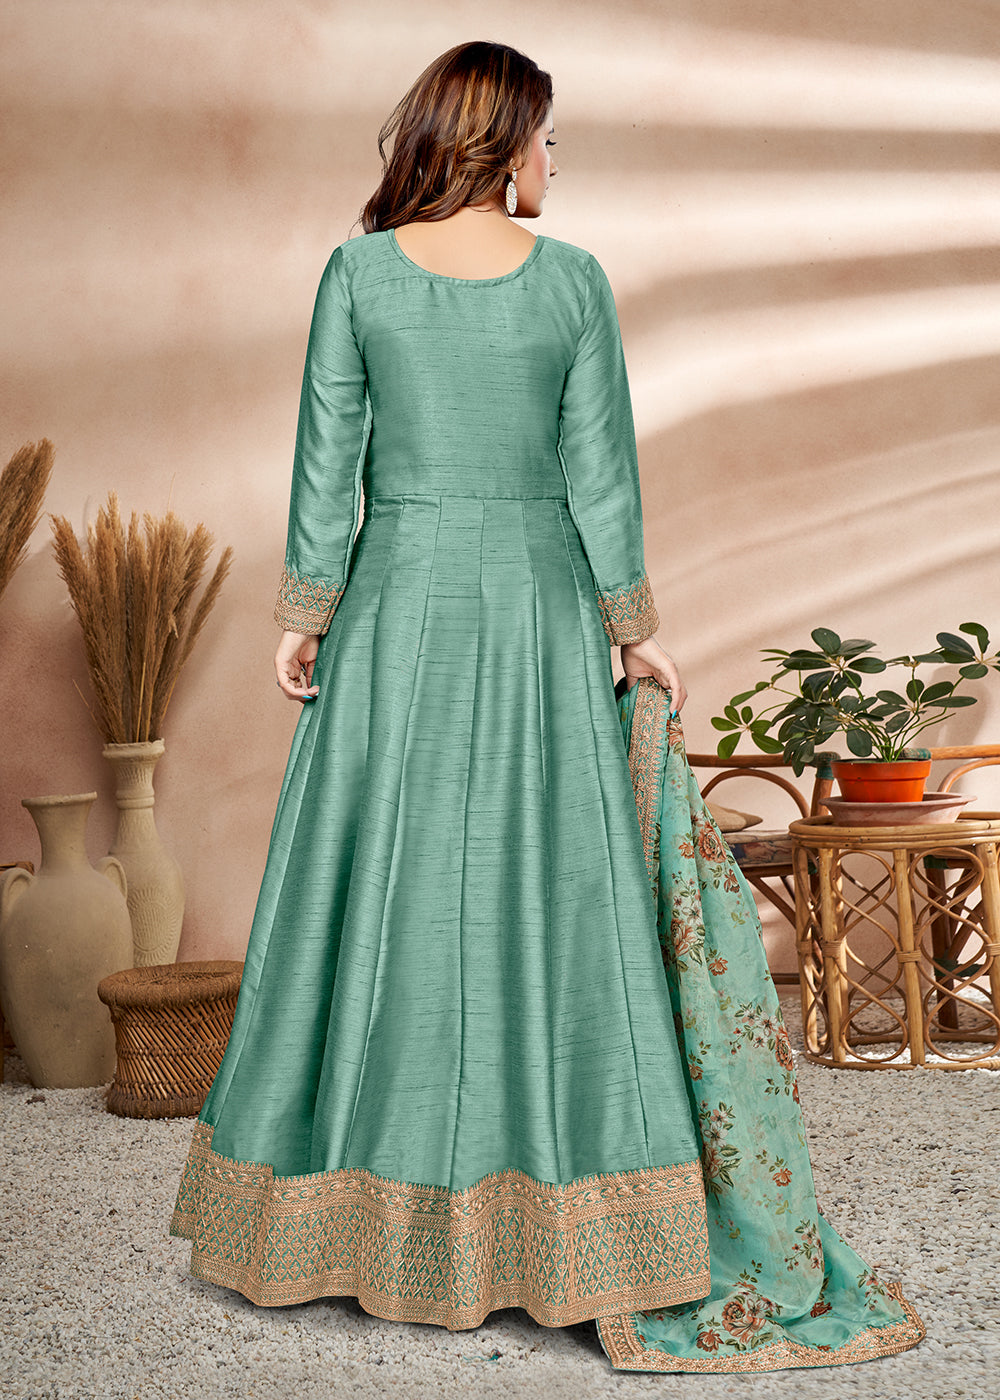 Buy Now Sea Green Art Silk Embellished Wedding & Party Anarkali Dress Online in Canada at Empress Clothing.